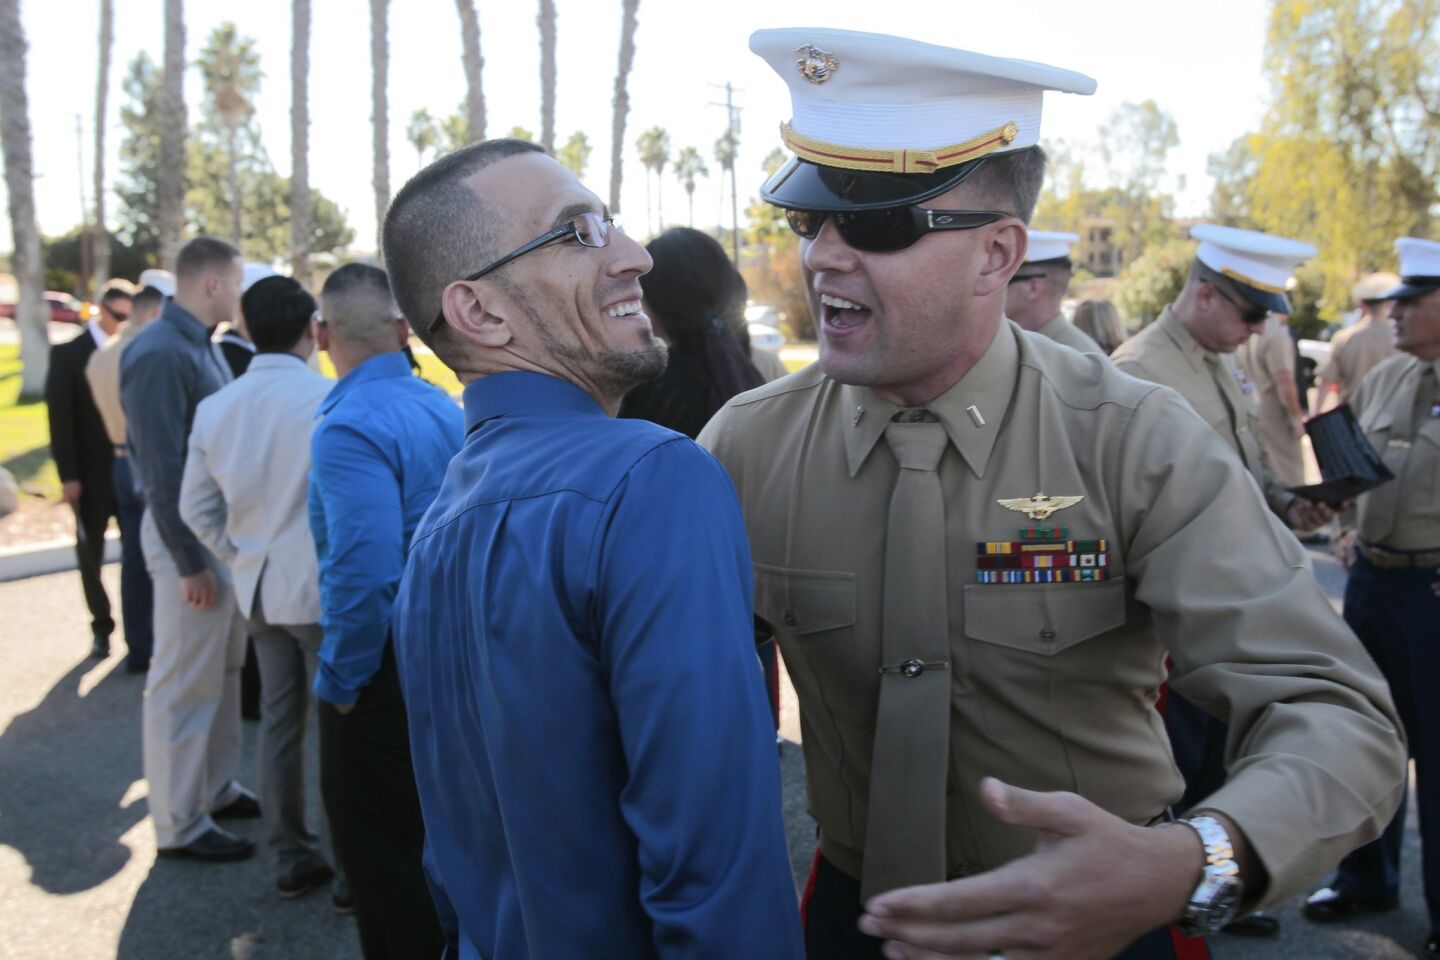 Marine veteran Joel Jimenez, left, and 1st Lt. Dan Dinneen, who were together during the Second Battle of Fallujah, greet after they arrived.